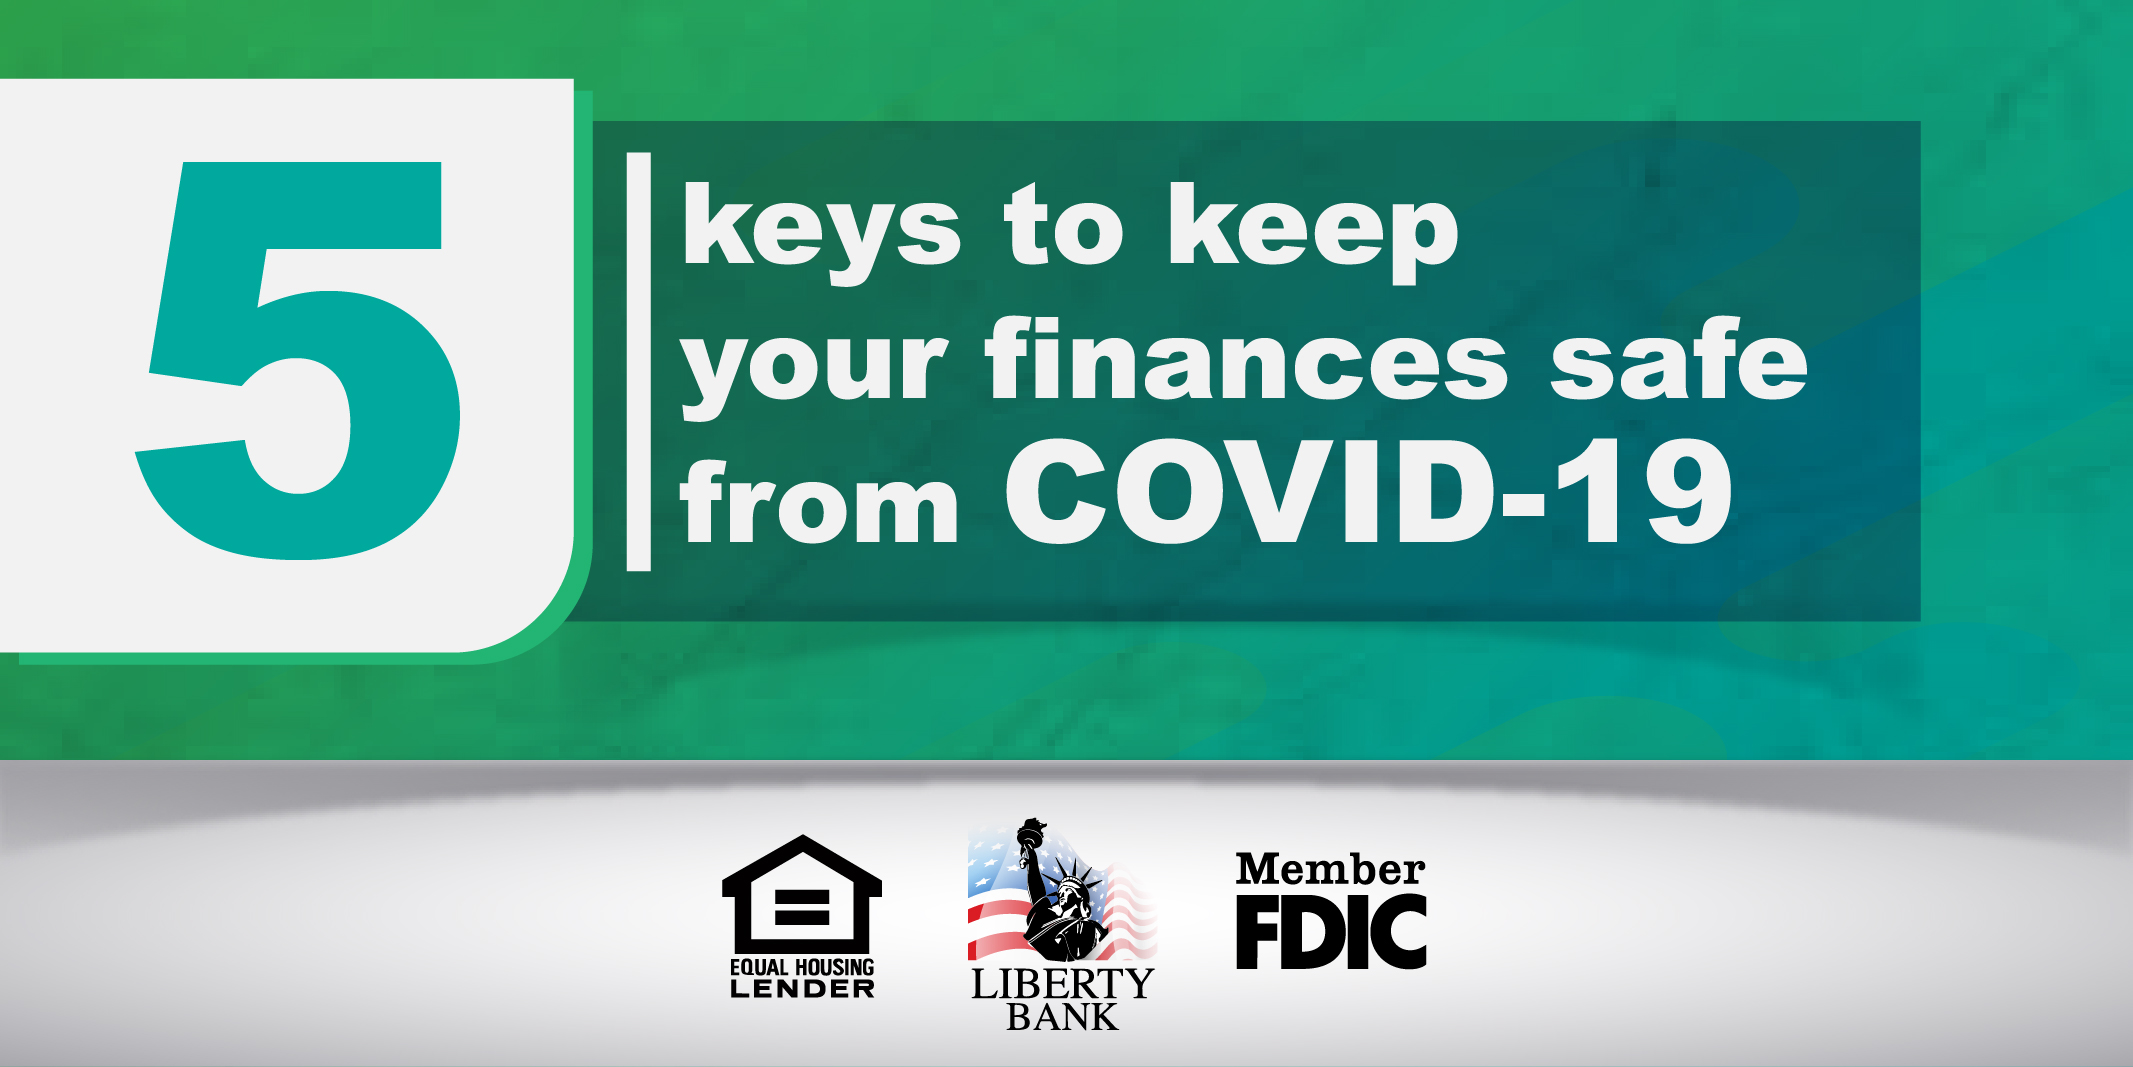 5 keys to keep your finances safe from COVID-19